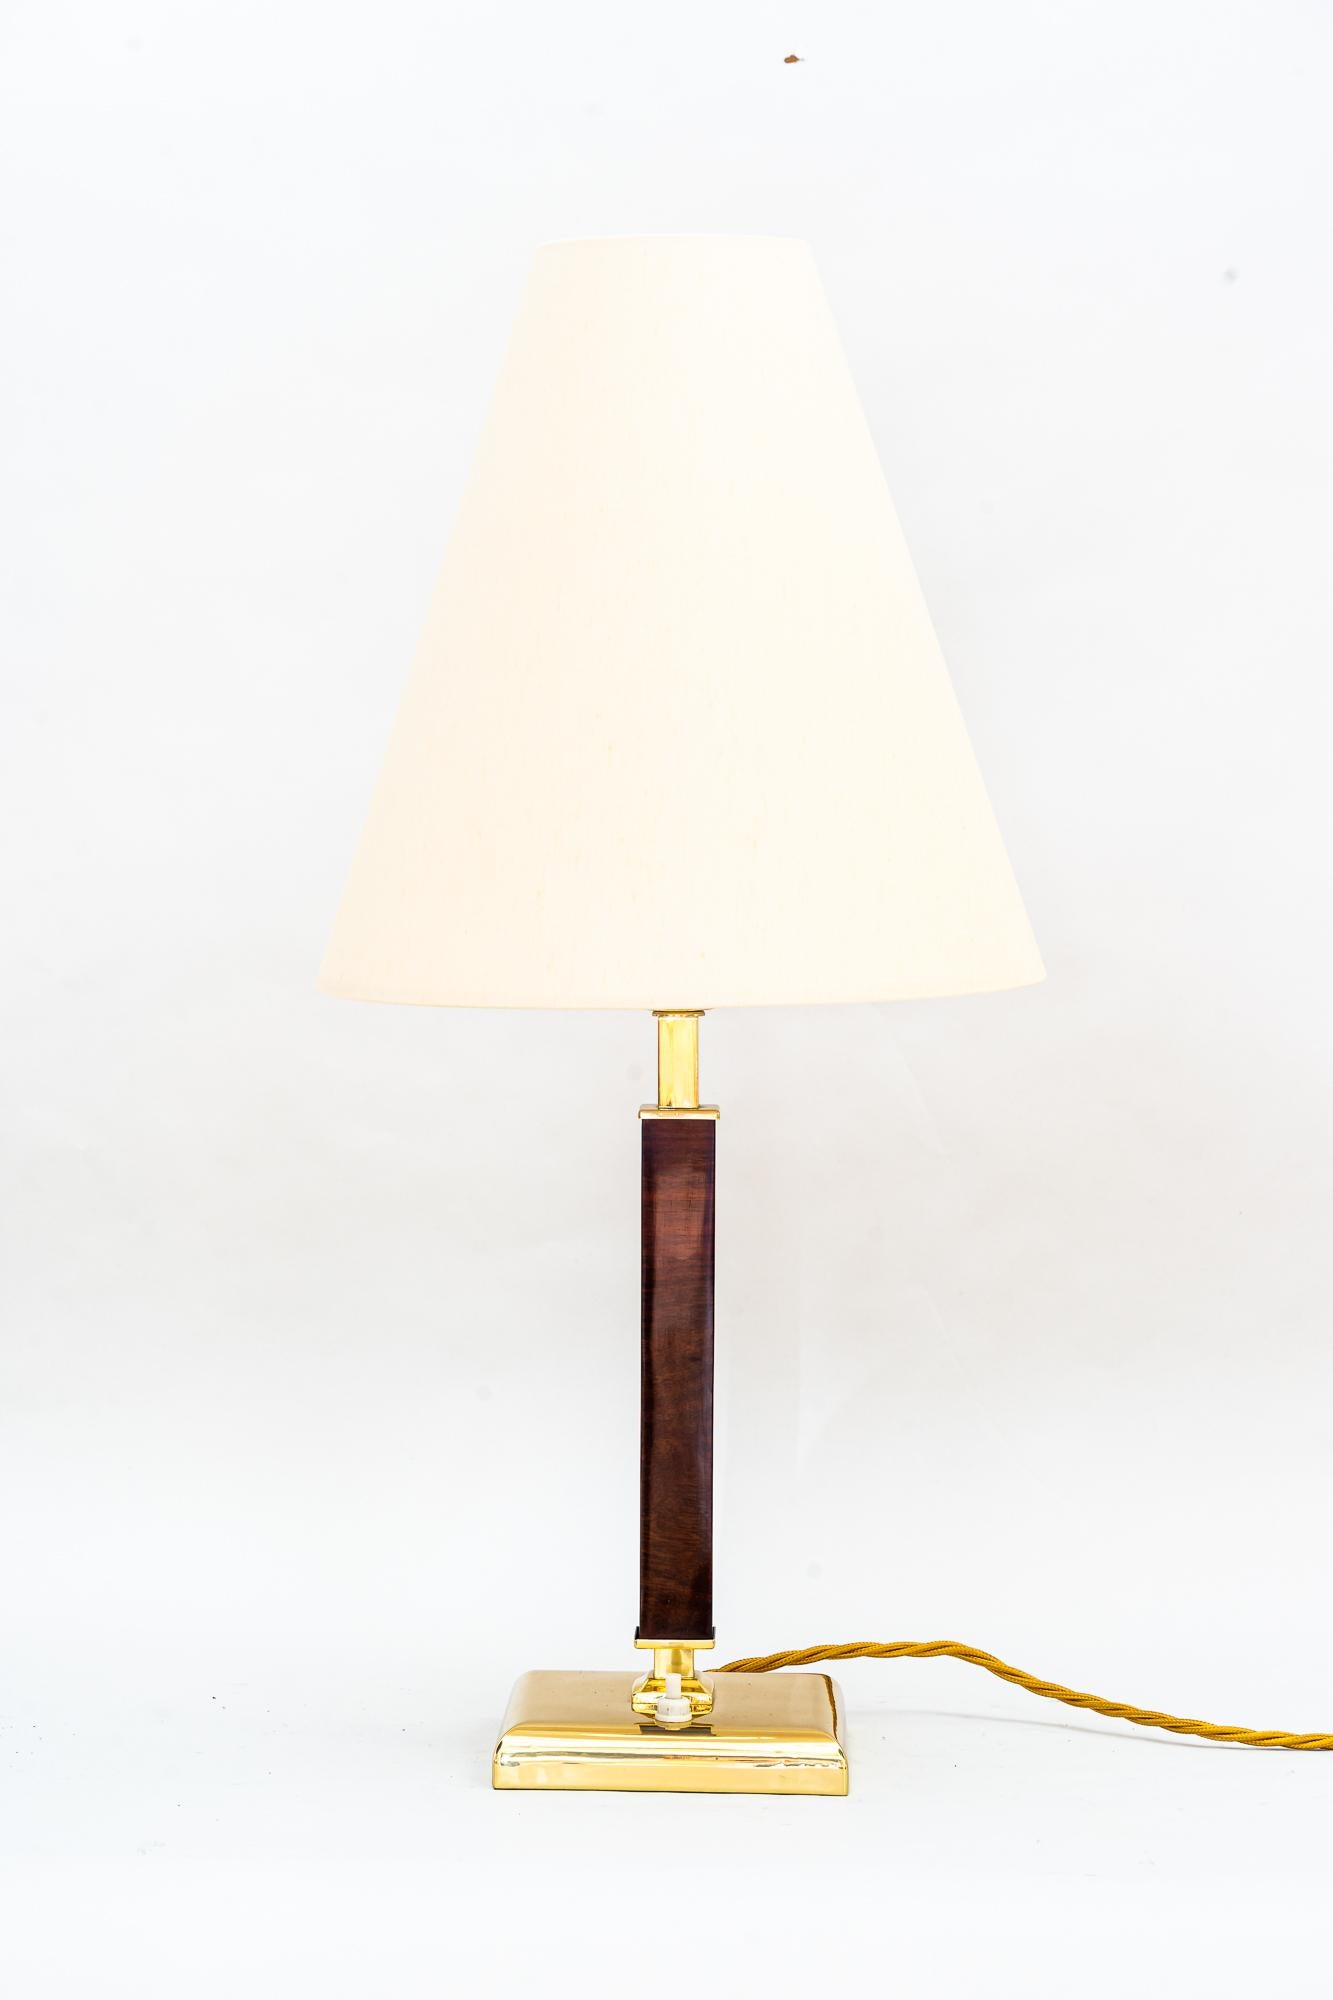 Art Deco table lamp with fabric shade vienna around 1930s
Polished and stove enameled 
The shade is replaced ( new )